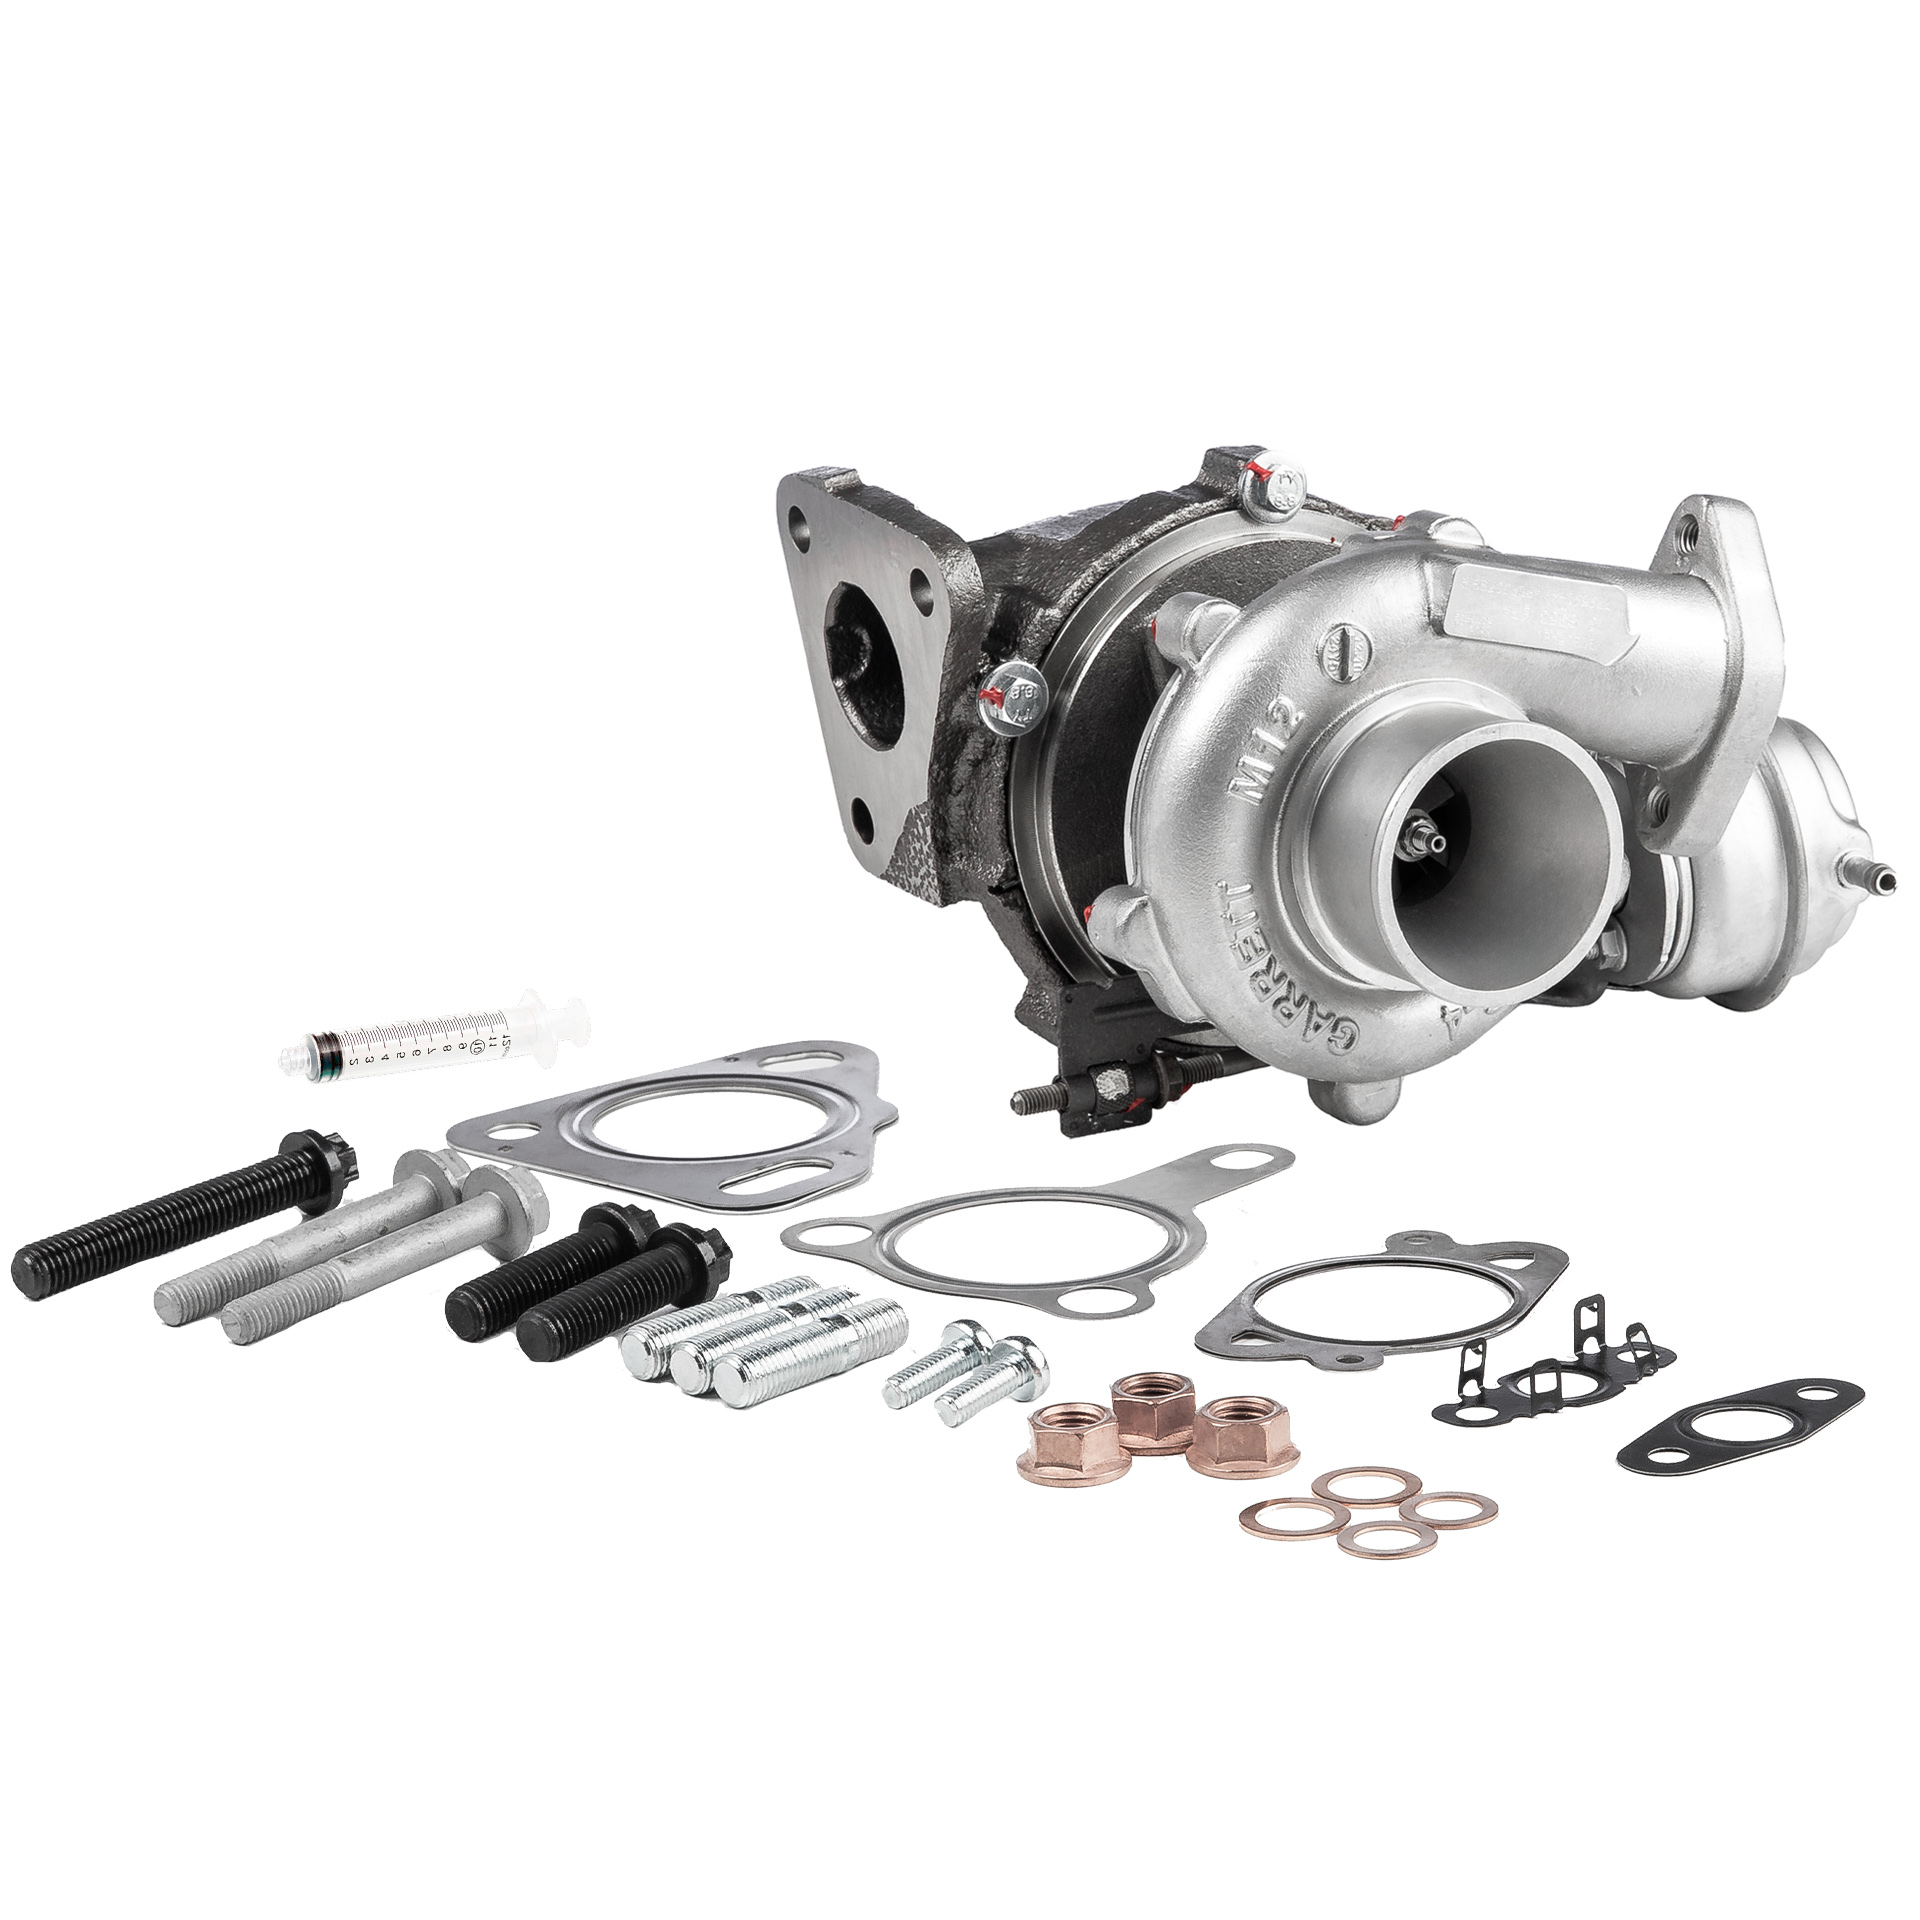 BR Turbo Turbo, with attachment material Turbo 779591-5001RSM buy